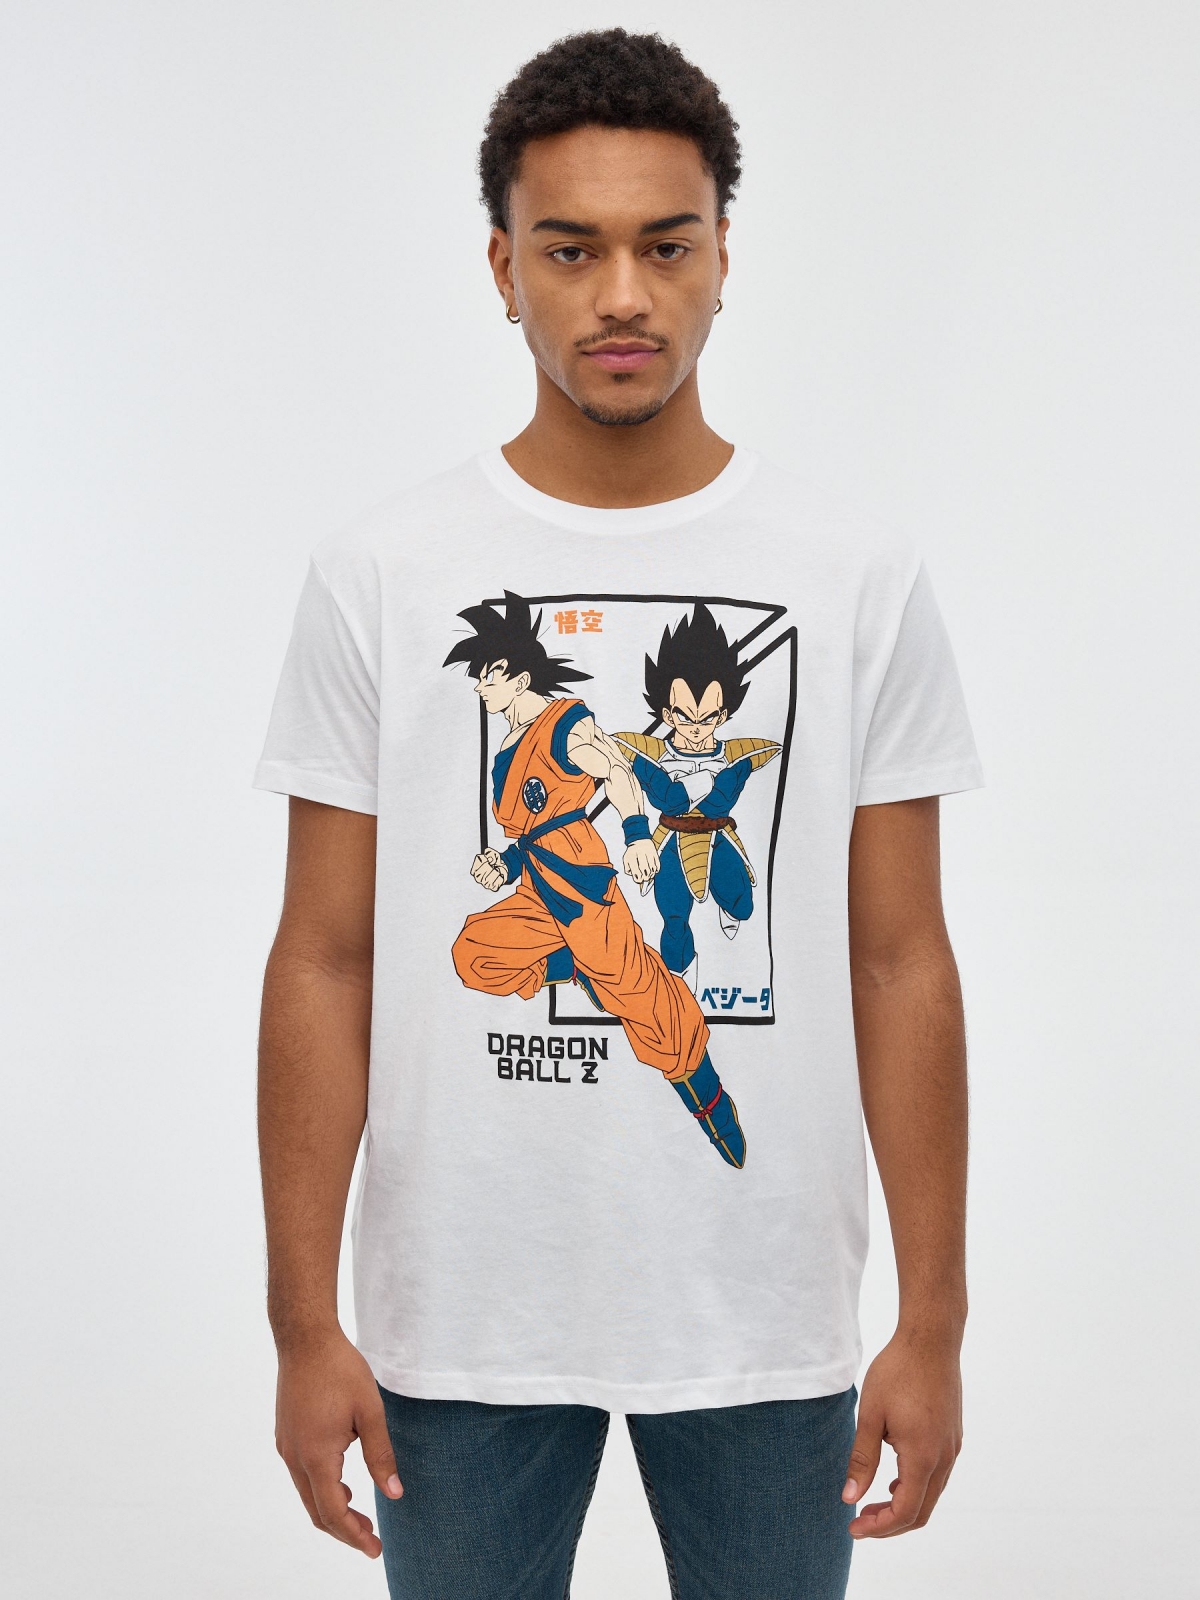 Dragon Ball t-shirt white middle front view